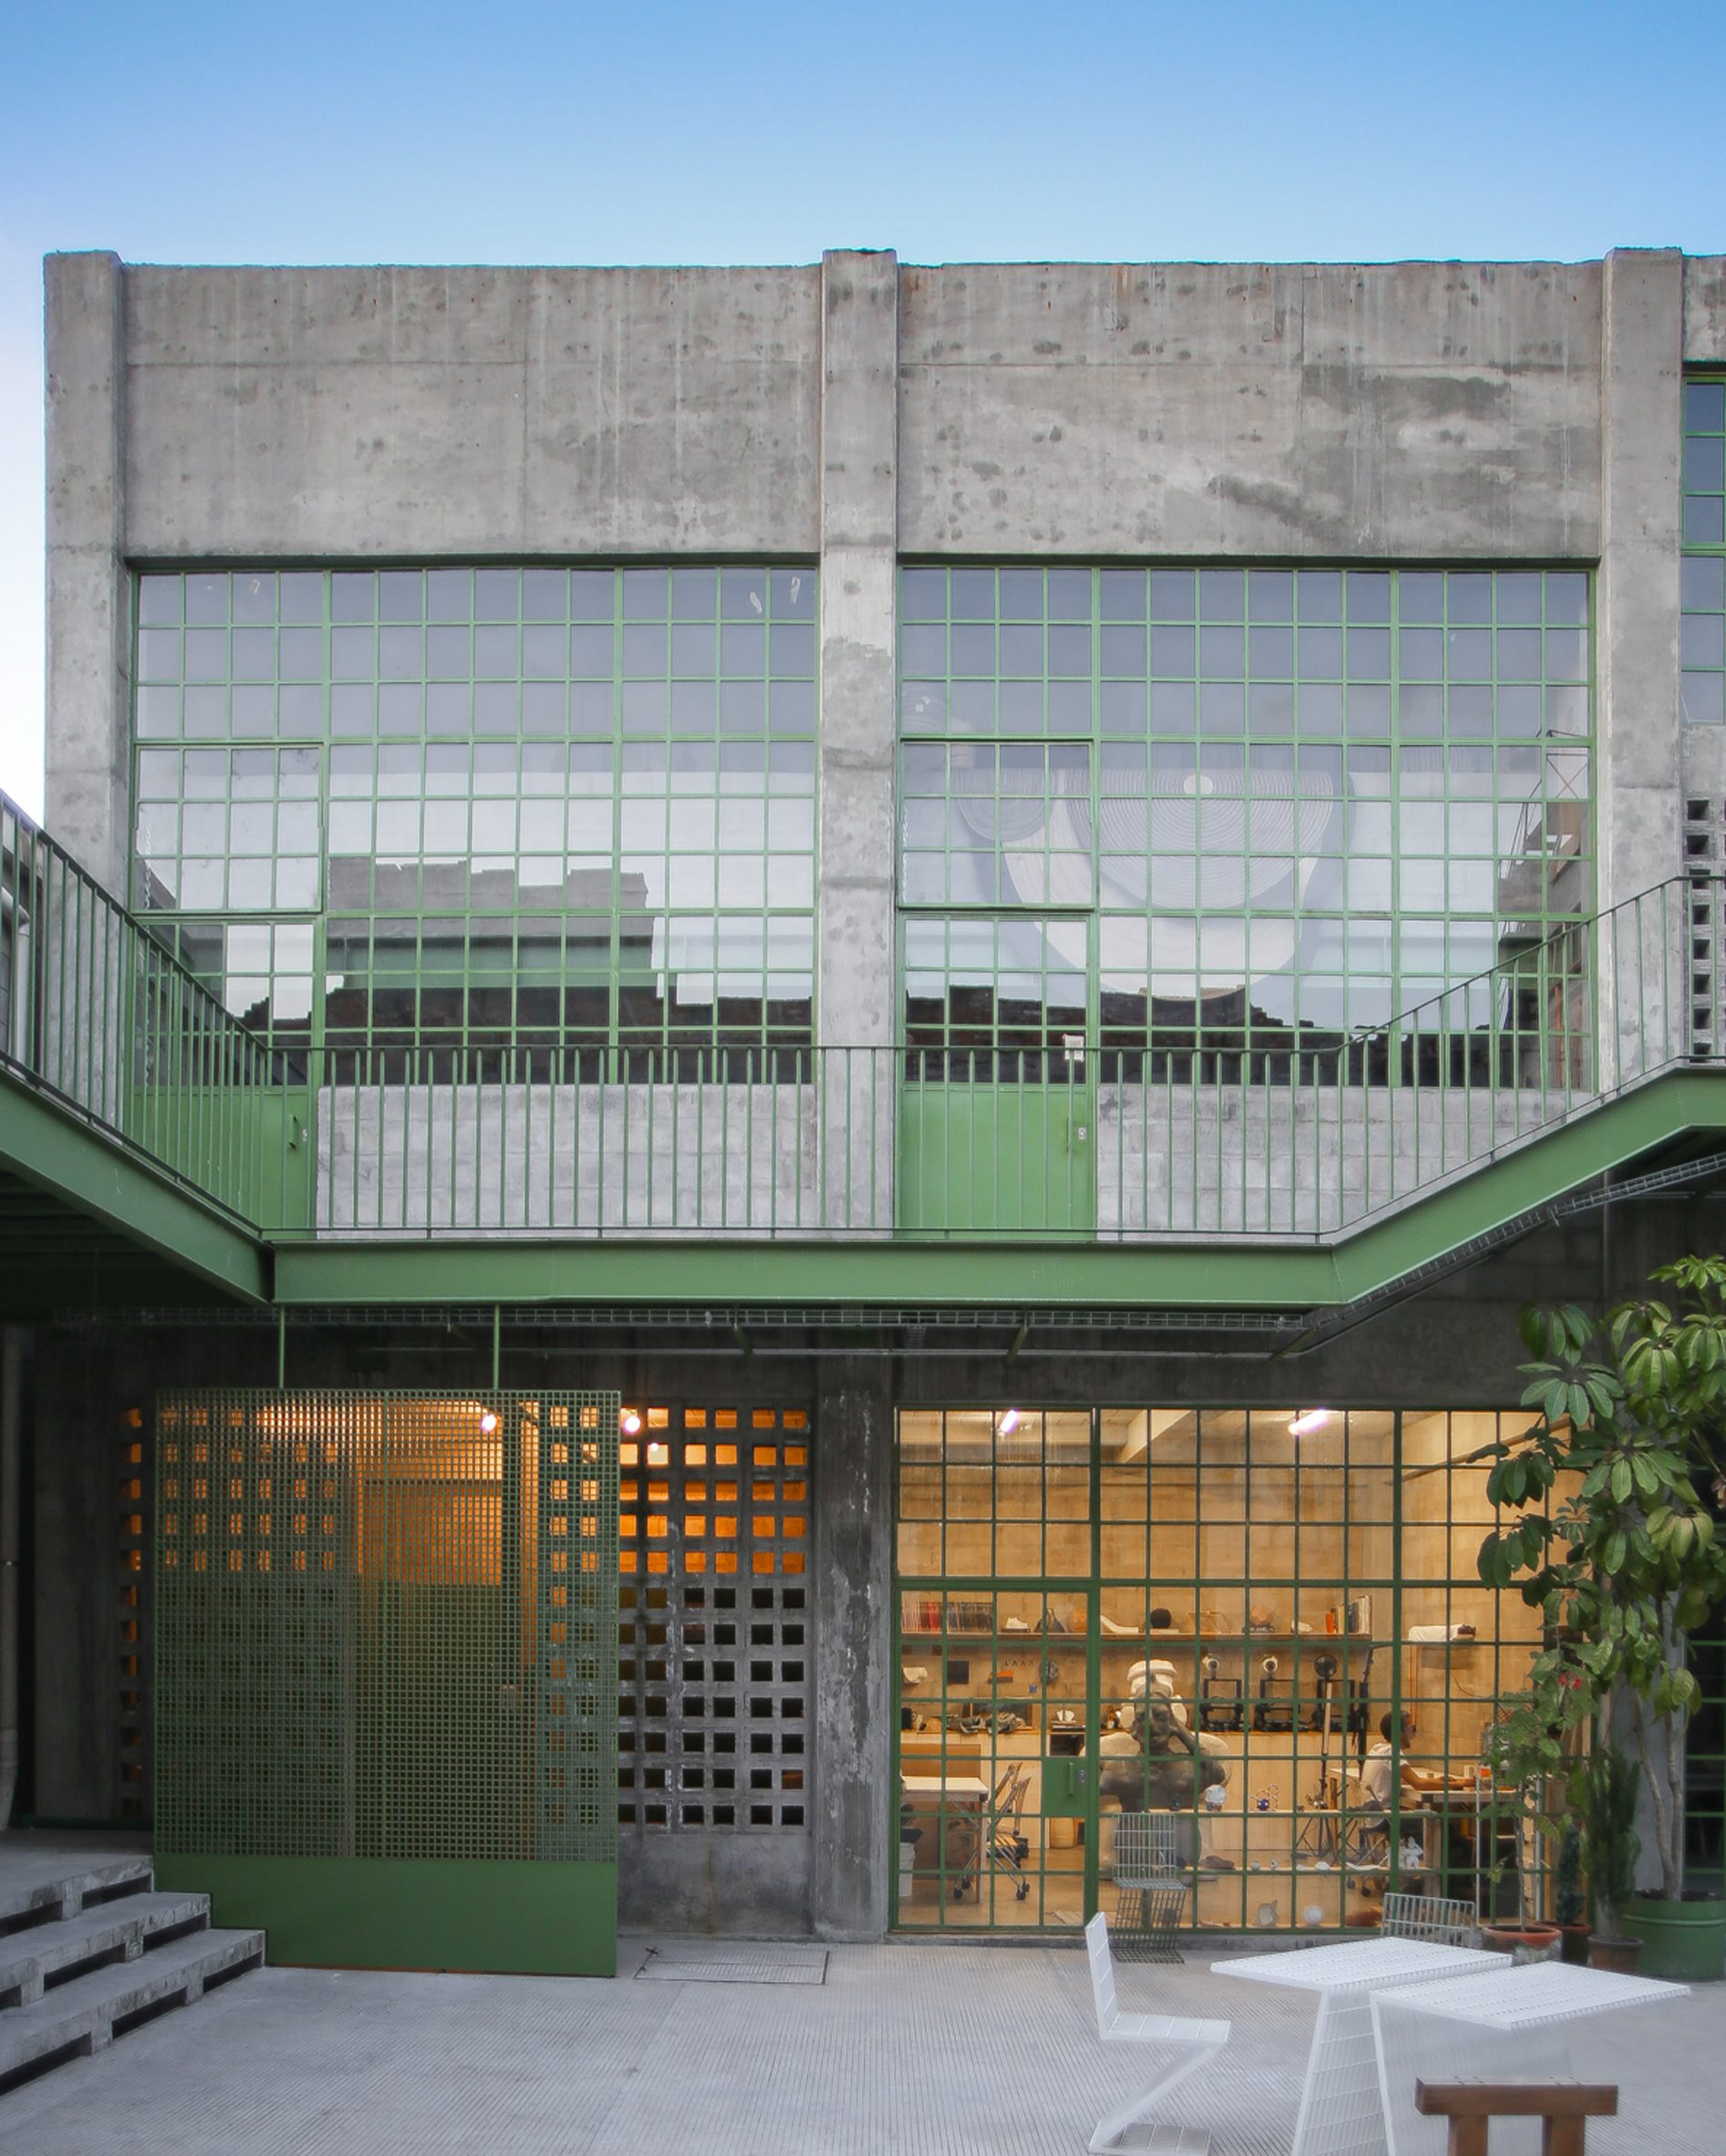 Concrete and green trim in Mexico City